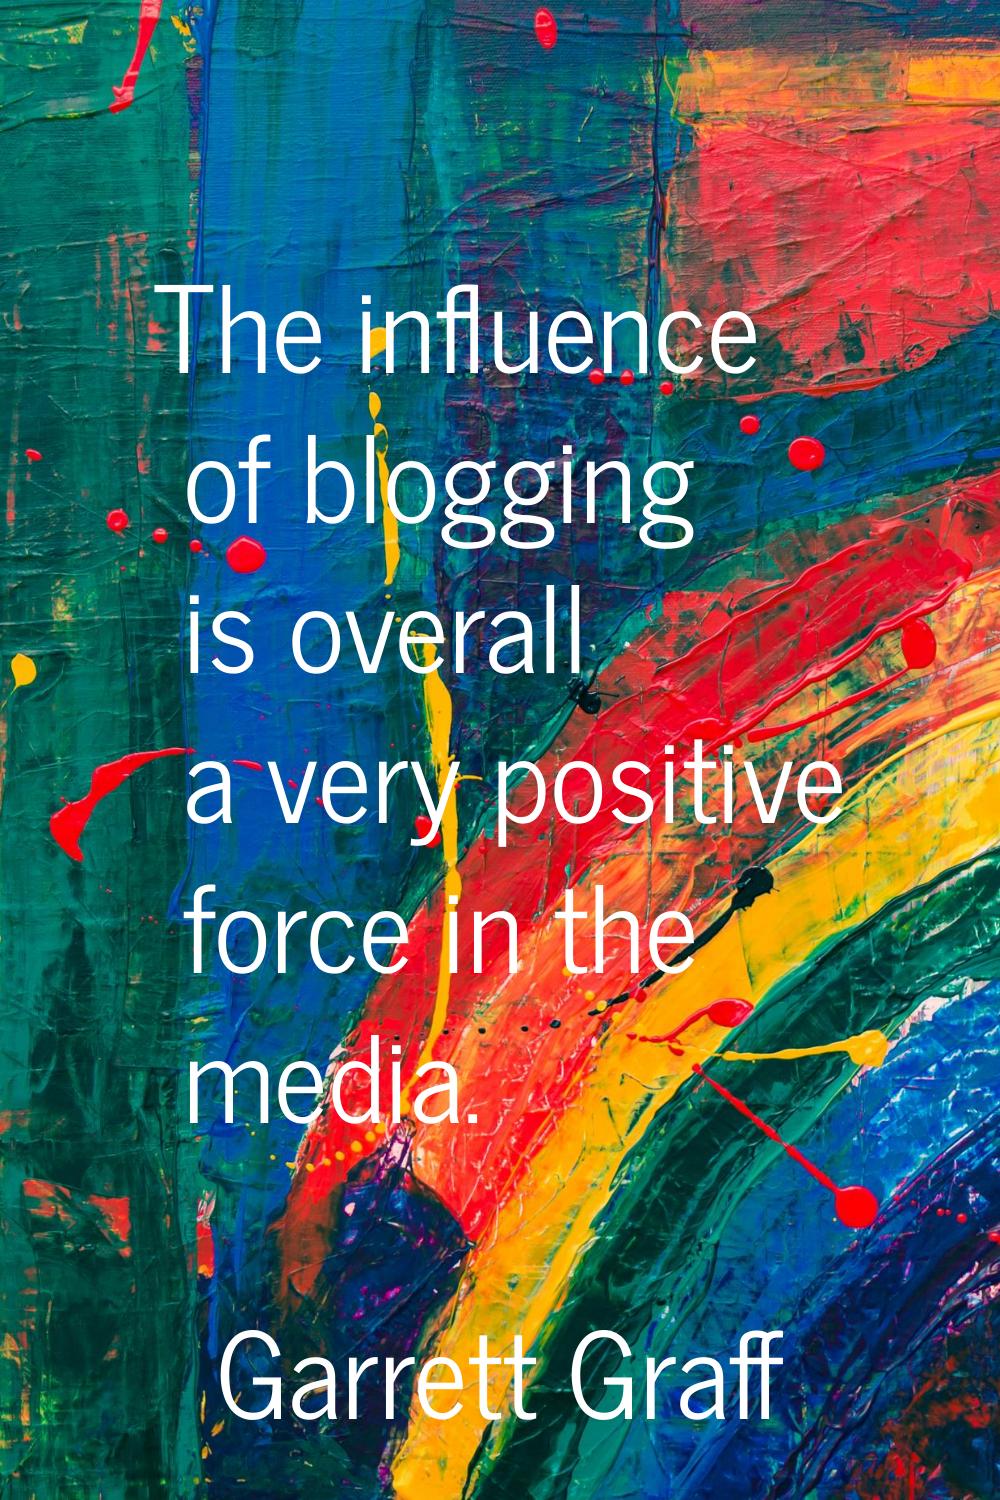 The influence of blogging is overall a very positive force in the media.